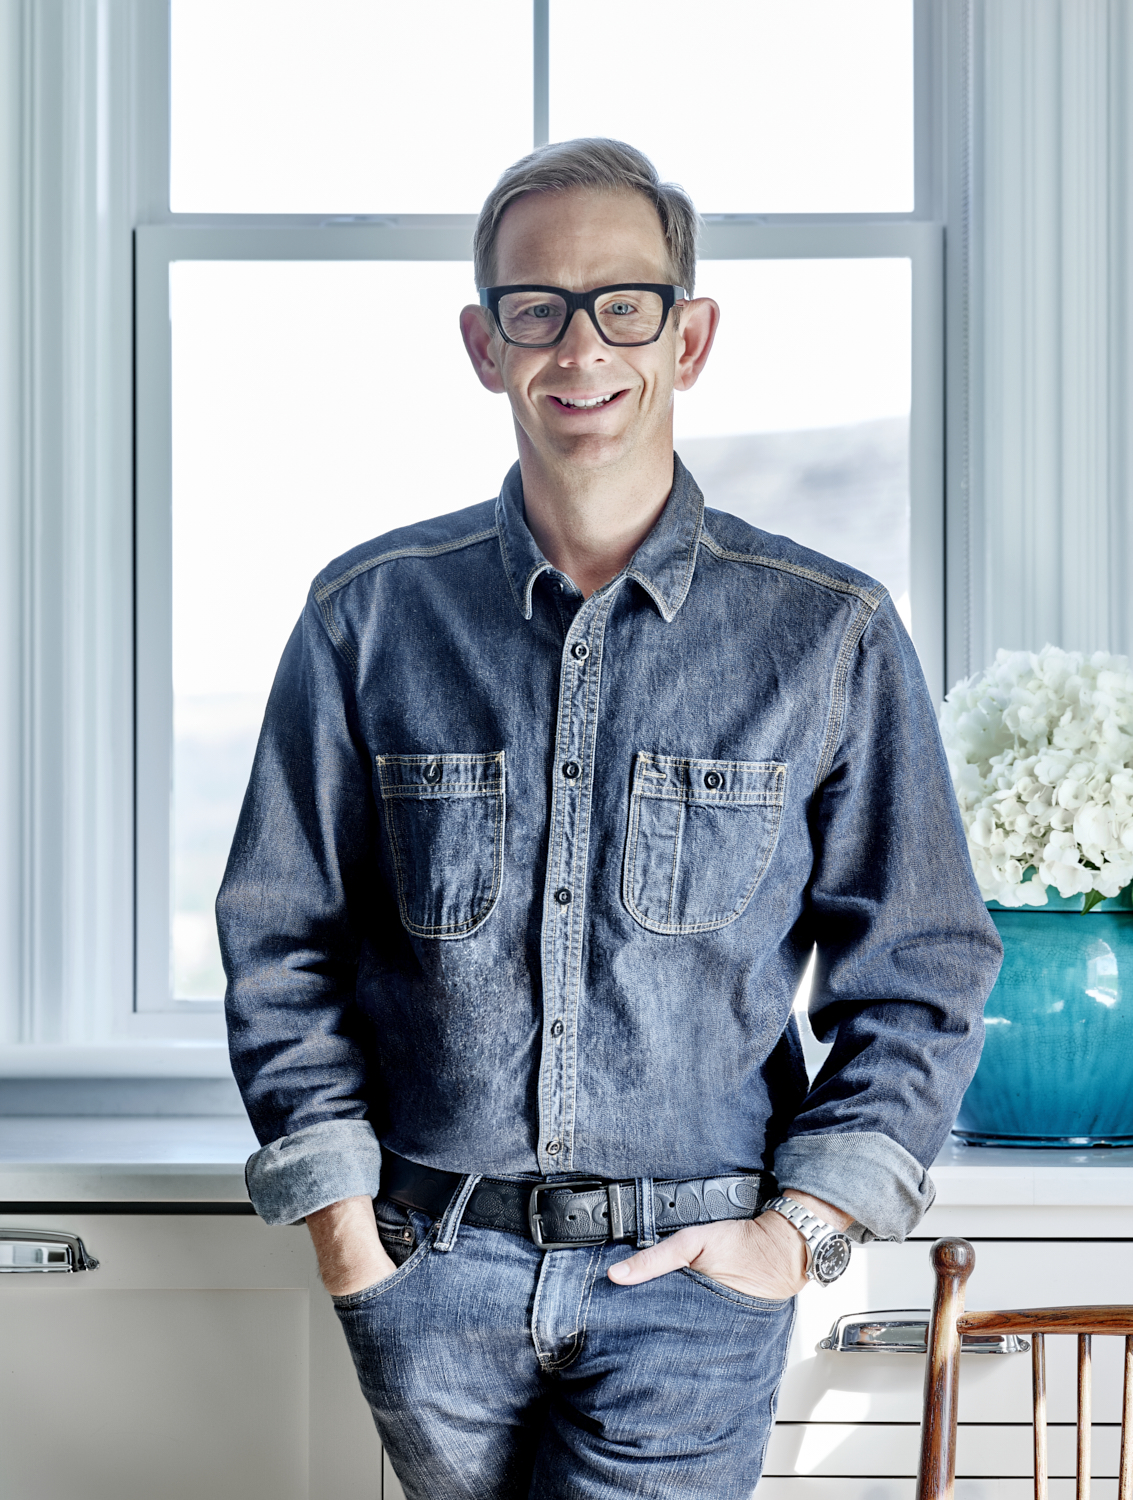 A man with glasses and denim clothes standing by a window 